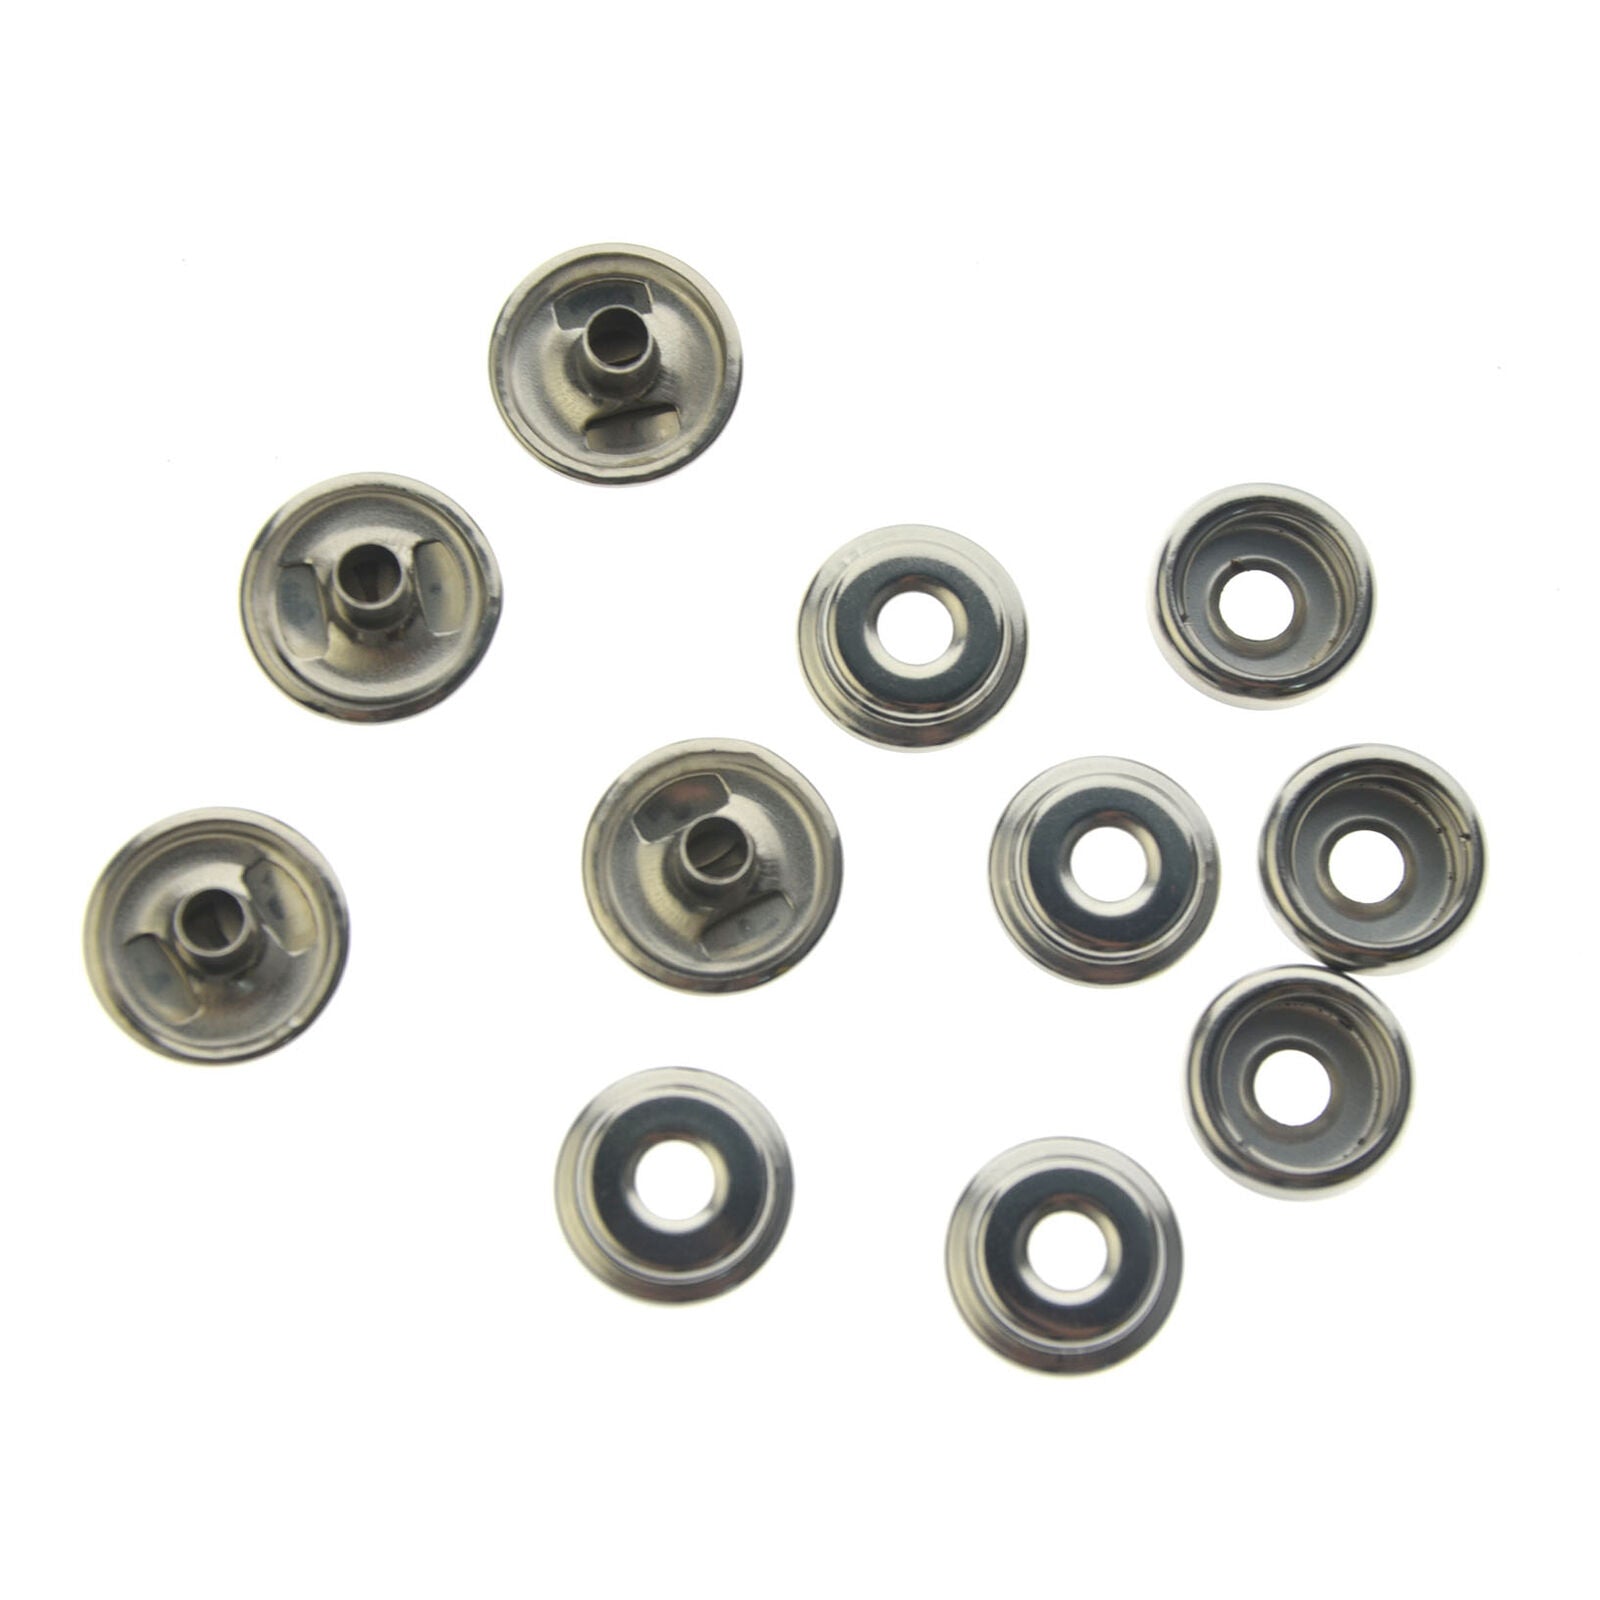 100pcs 15MM Stainless Steel Fastener Snap Stud Button DIY Leather Craft Tool Kit